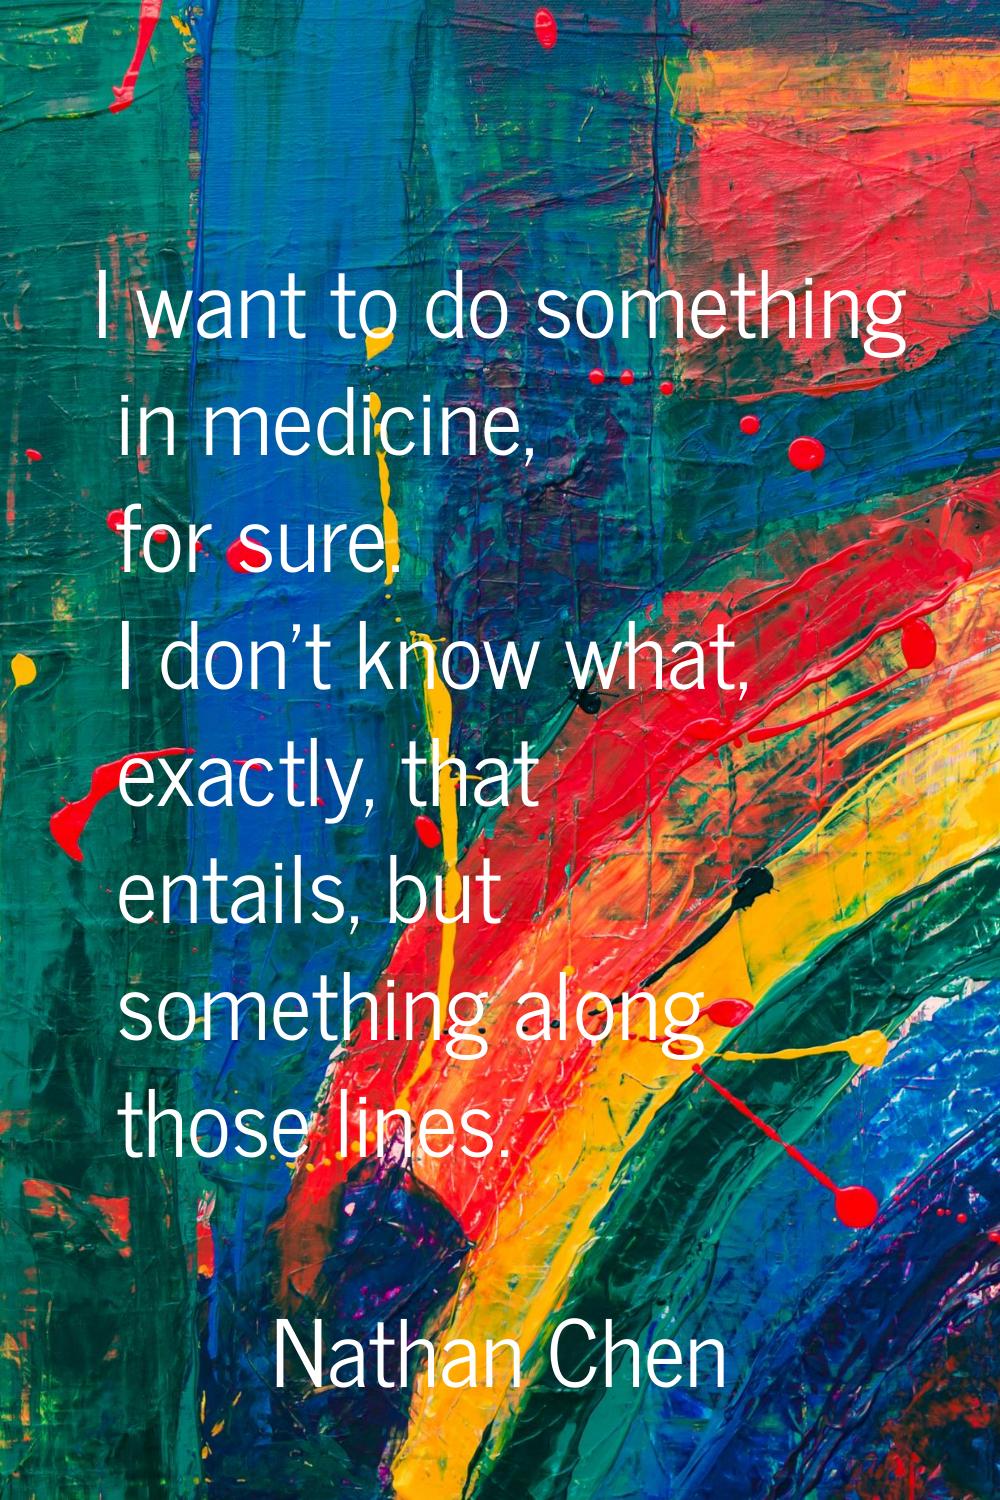 I want to do something in medicine, for sure. I don't know what, exactly, that entails, but somethi